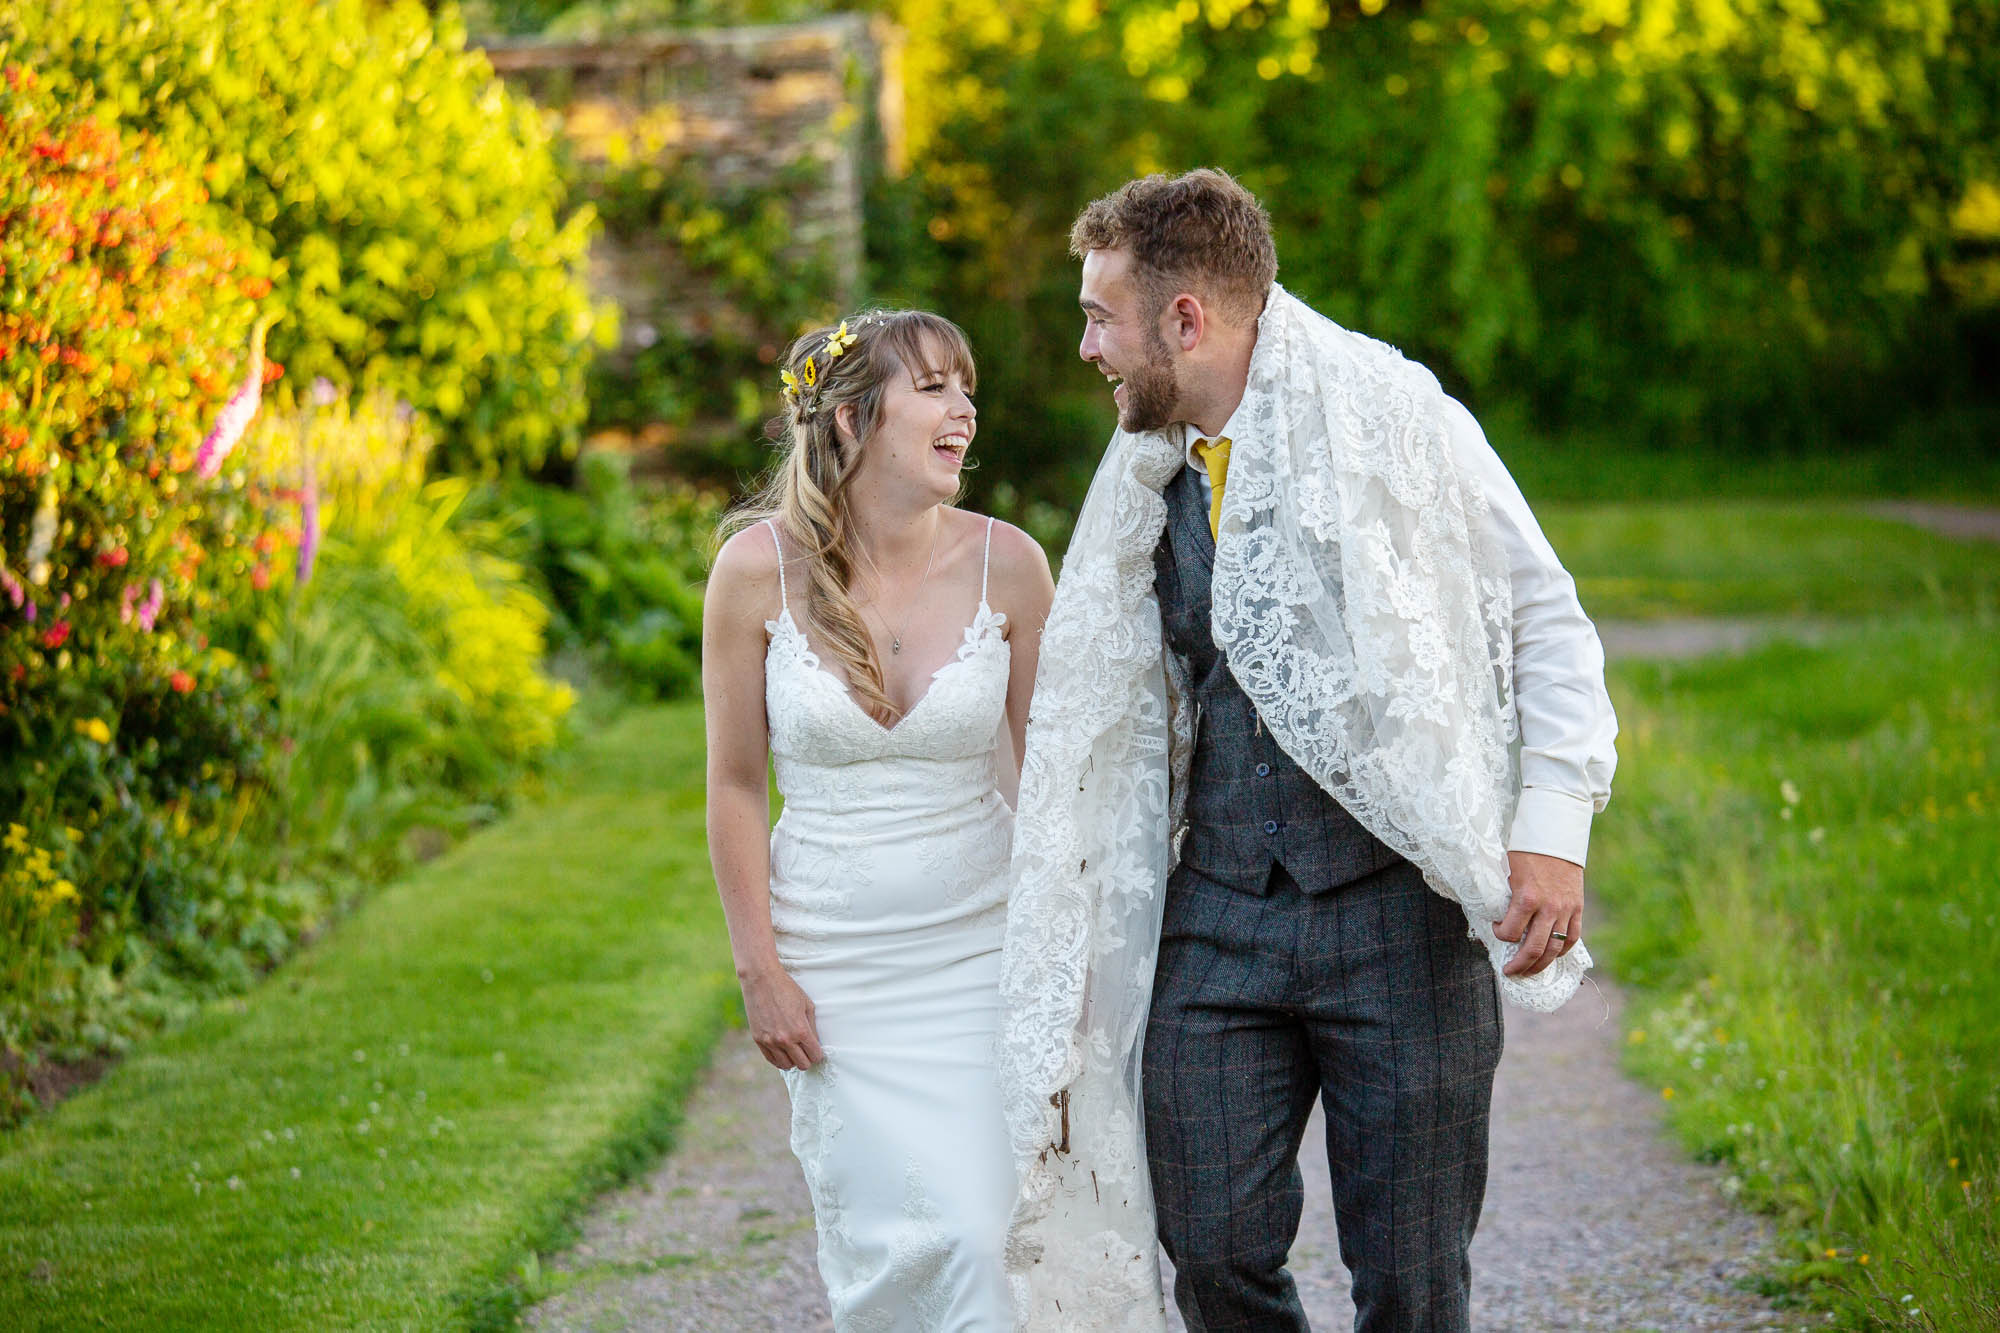 Meg and Joe's sunflower wedding at Hestercombe is full of sunshine and vibrant styling touches. With Martin Dabek Photography